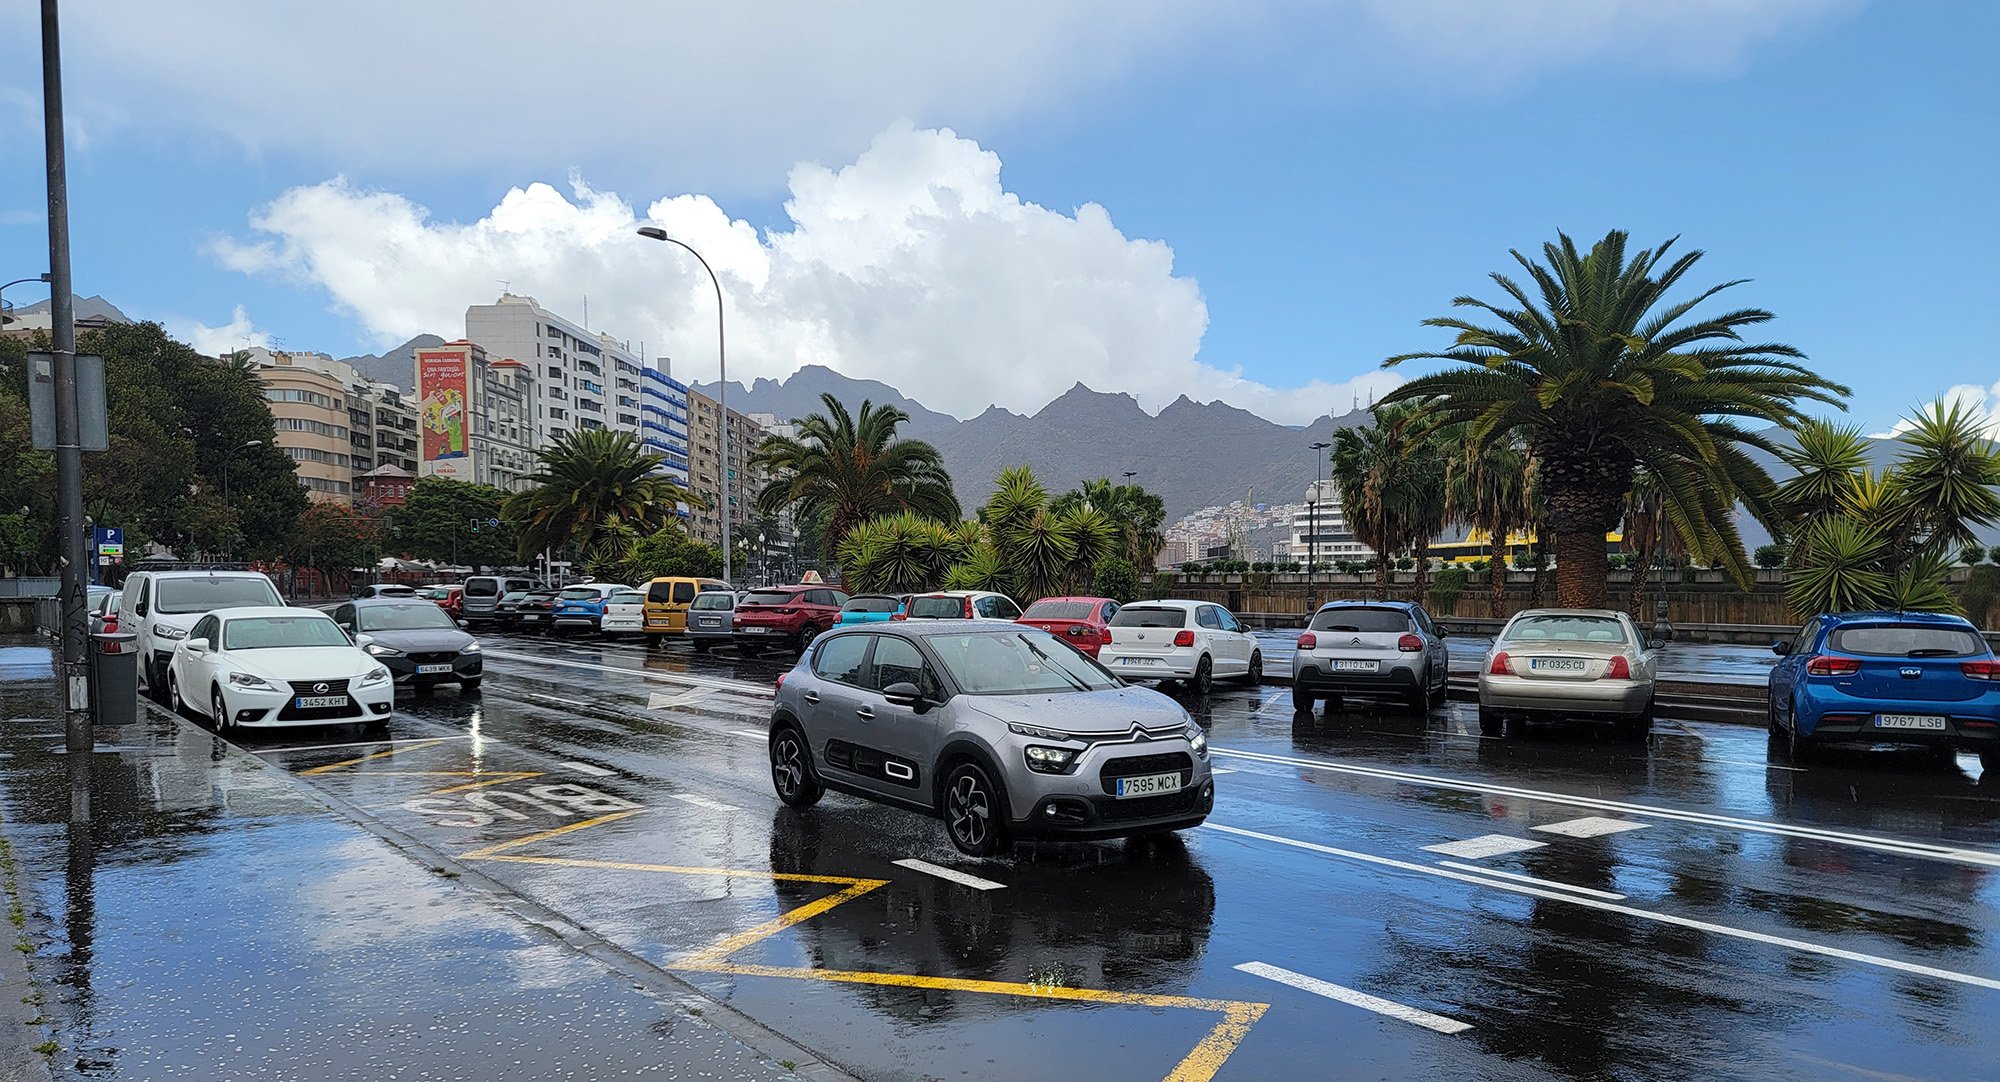 Raining upon arrival in Tenerife. Walked like 1km in the rain trying to get to a bus stop.